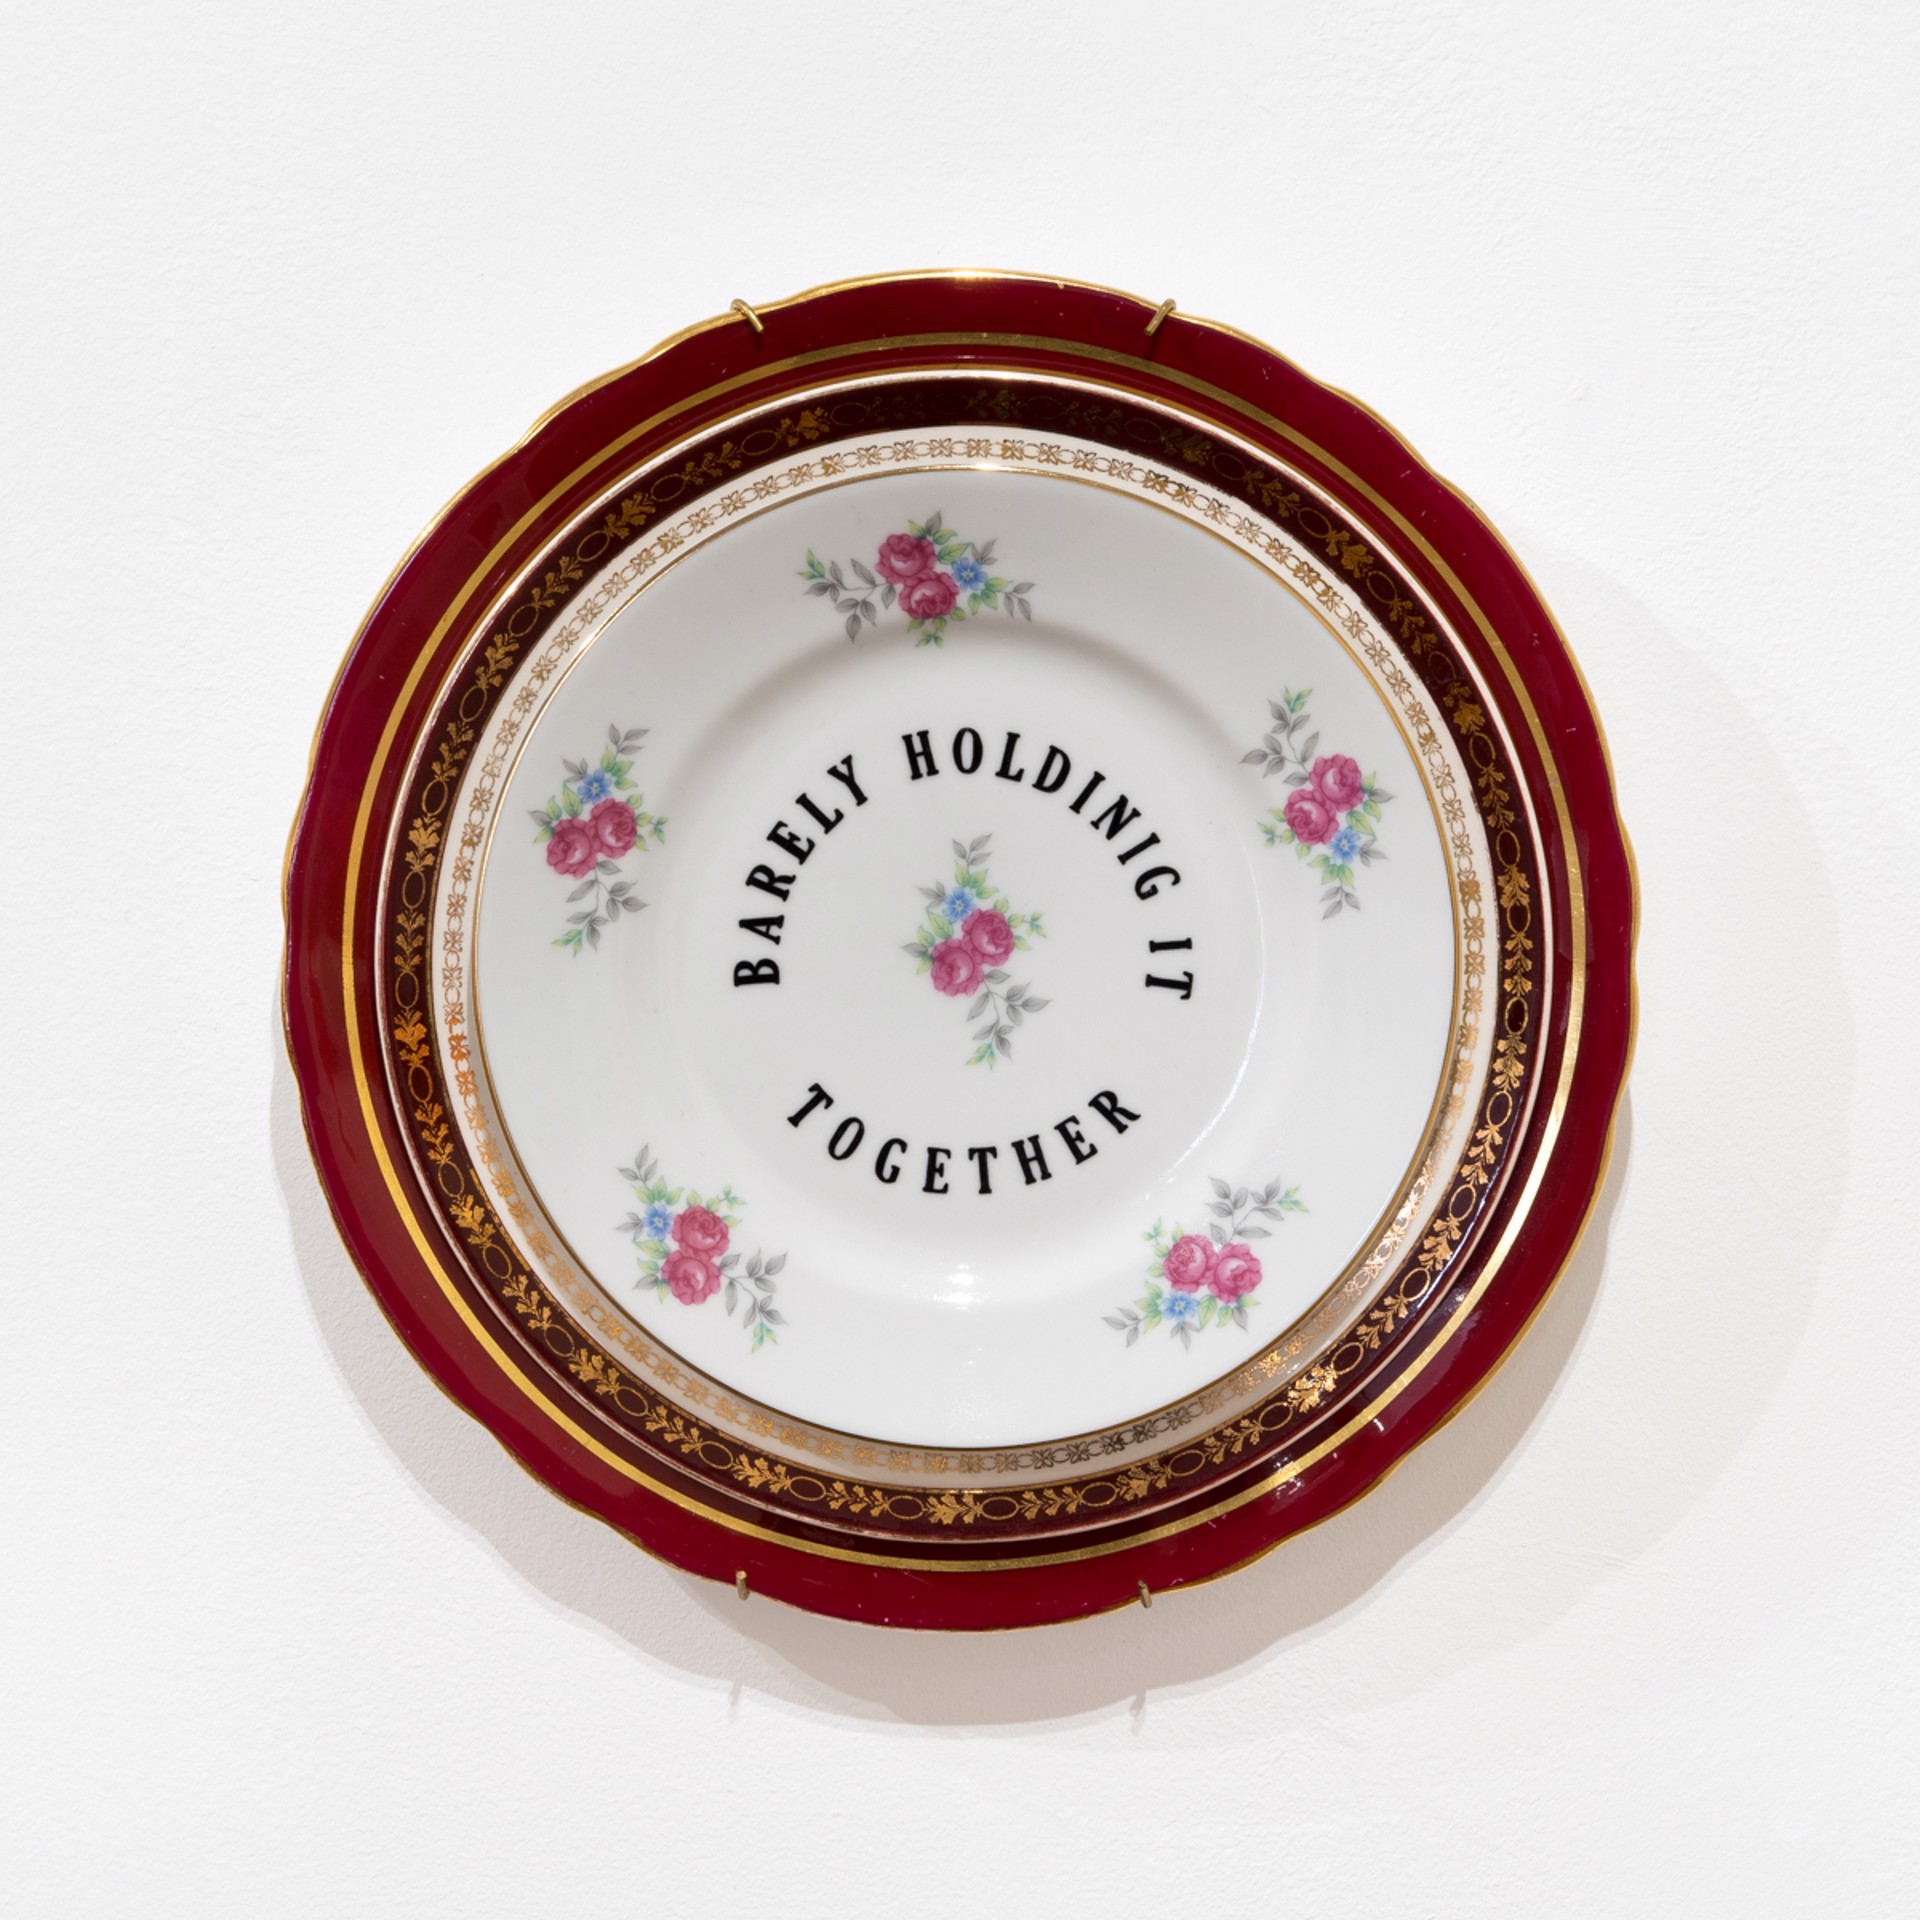 Barely Holdinig [sic] Together (Wallflower - plate assortment) by Marie-Claude Marquis